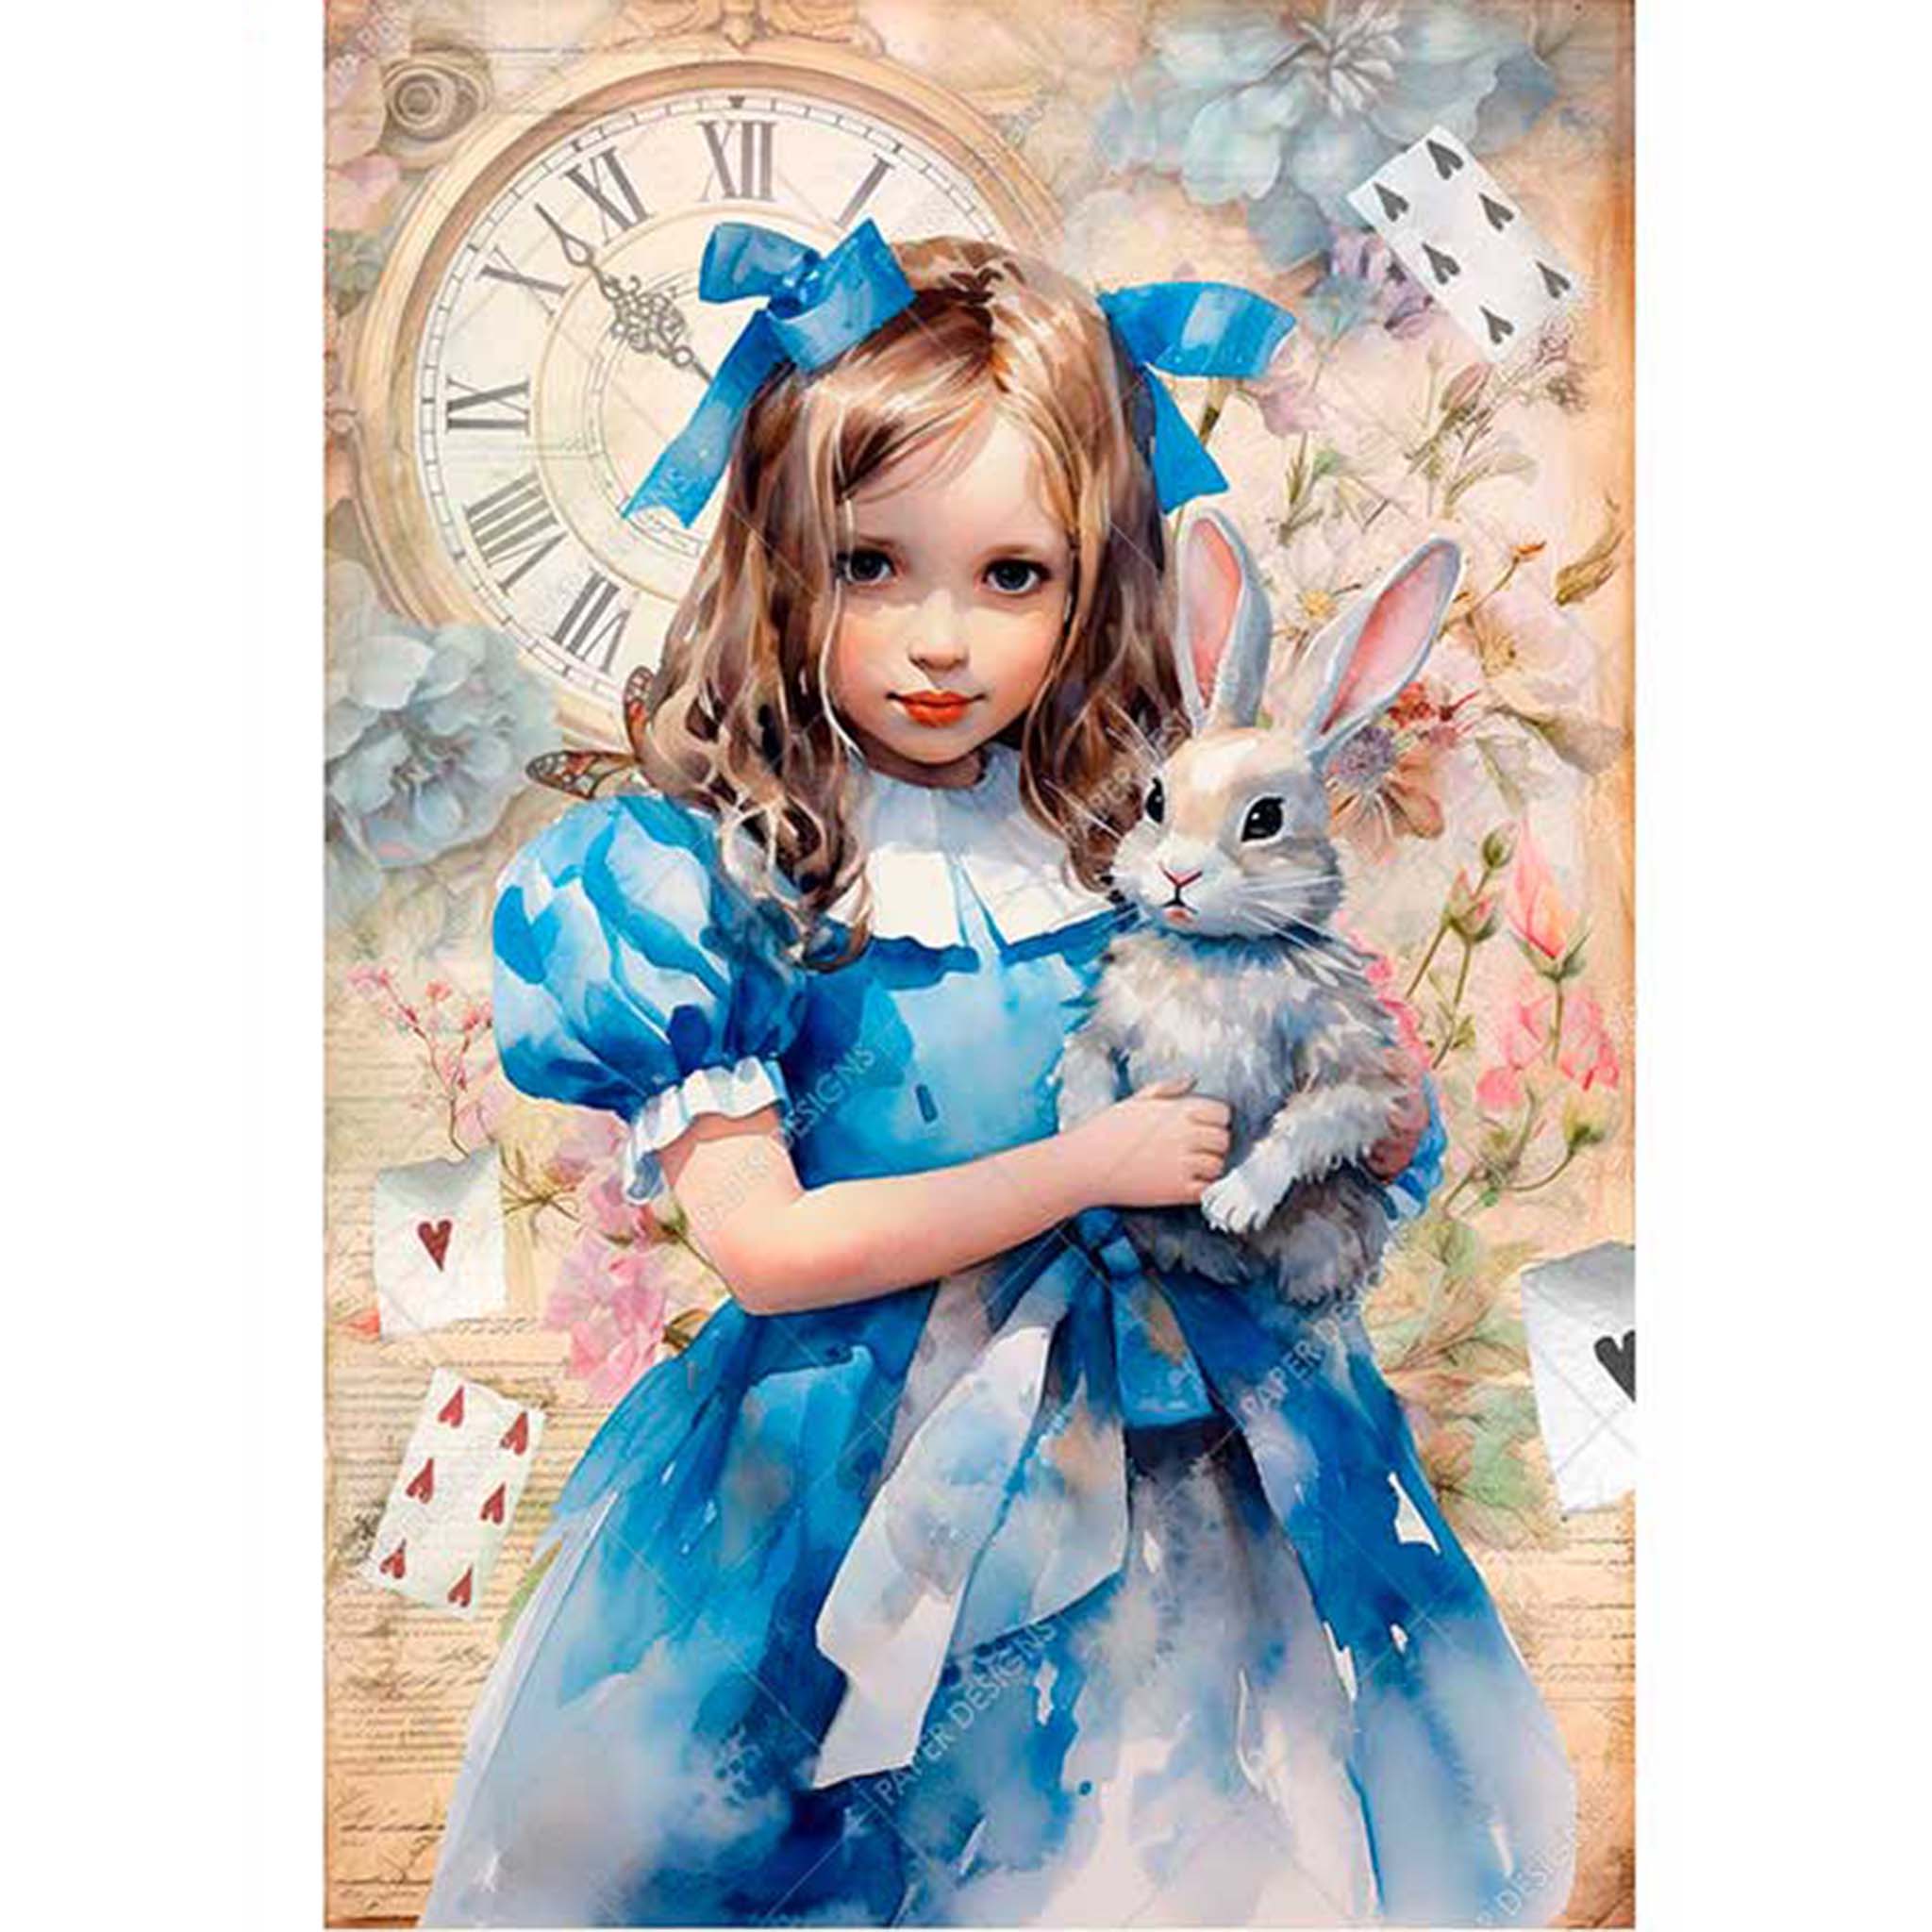 A3 rice paper design featuring a young Alice holding a white rabbit in front of a background filled with Alice In Wonderland themed items. White borders are on the sides.